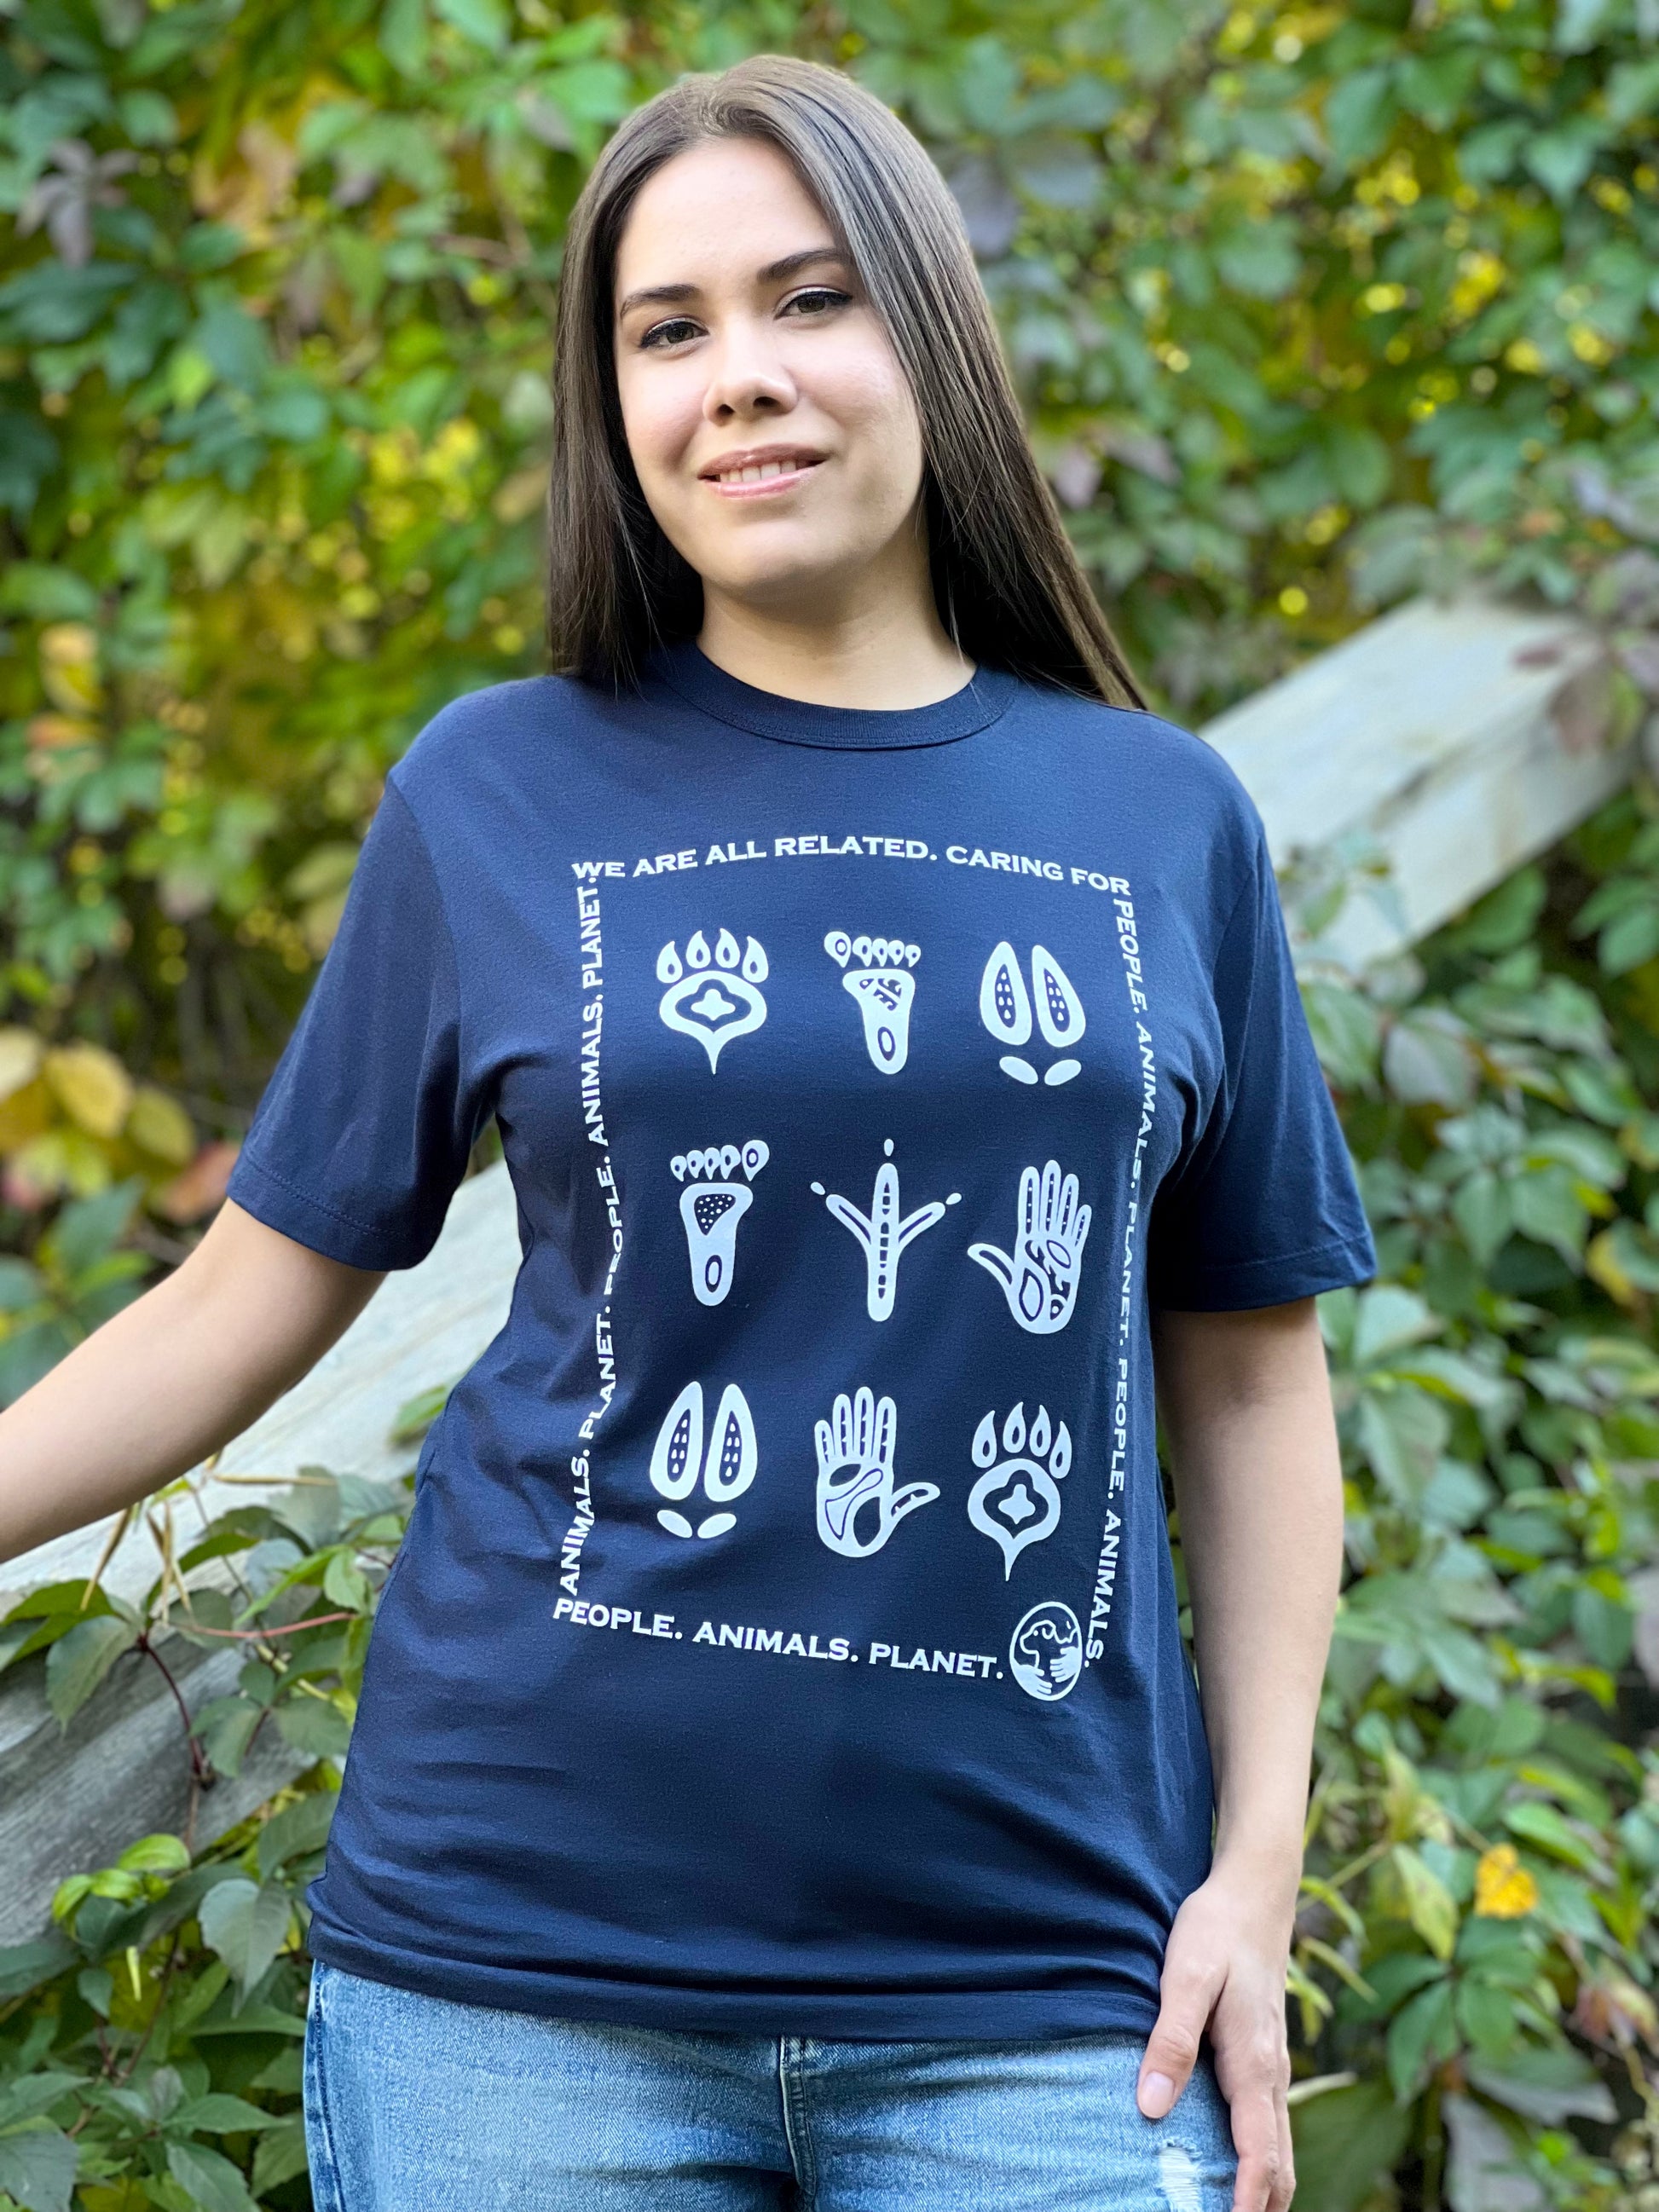 A woman wearing a midnight blue t-shirt with a white print of stylized animal and human footprints encased by a rectangle formed by the words "Wea are all related. Caring for People. Animals, Planet."